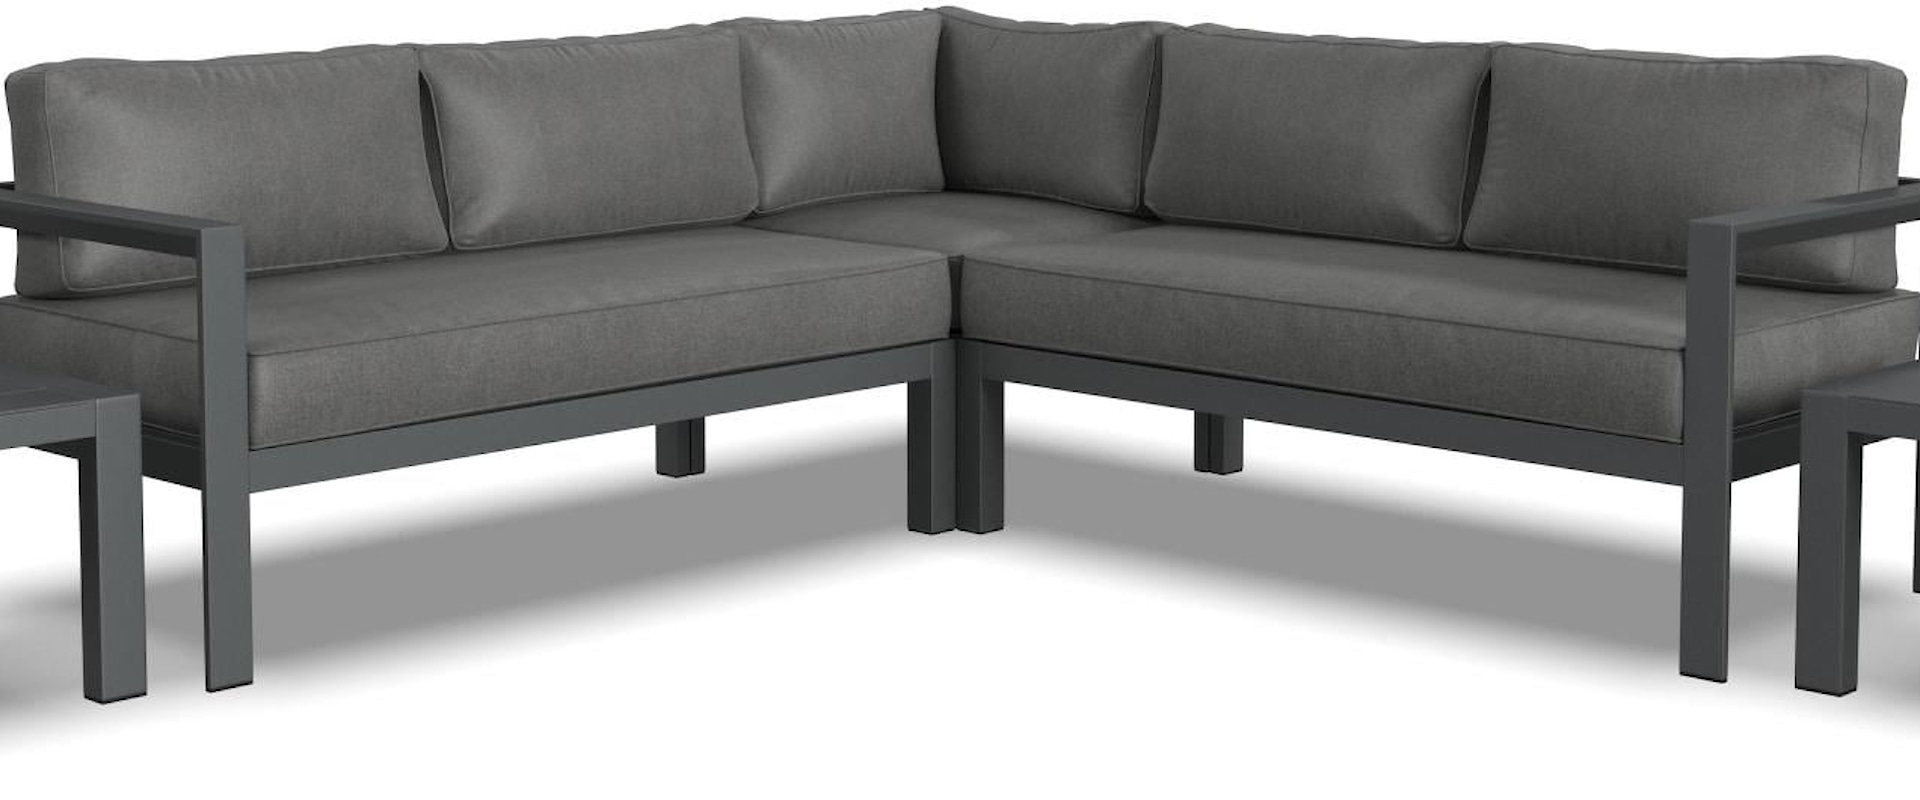 Contemporary 5-Piece Sectional Sofa with 2 End Tables